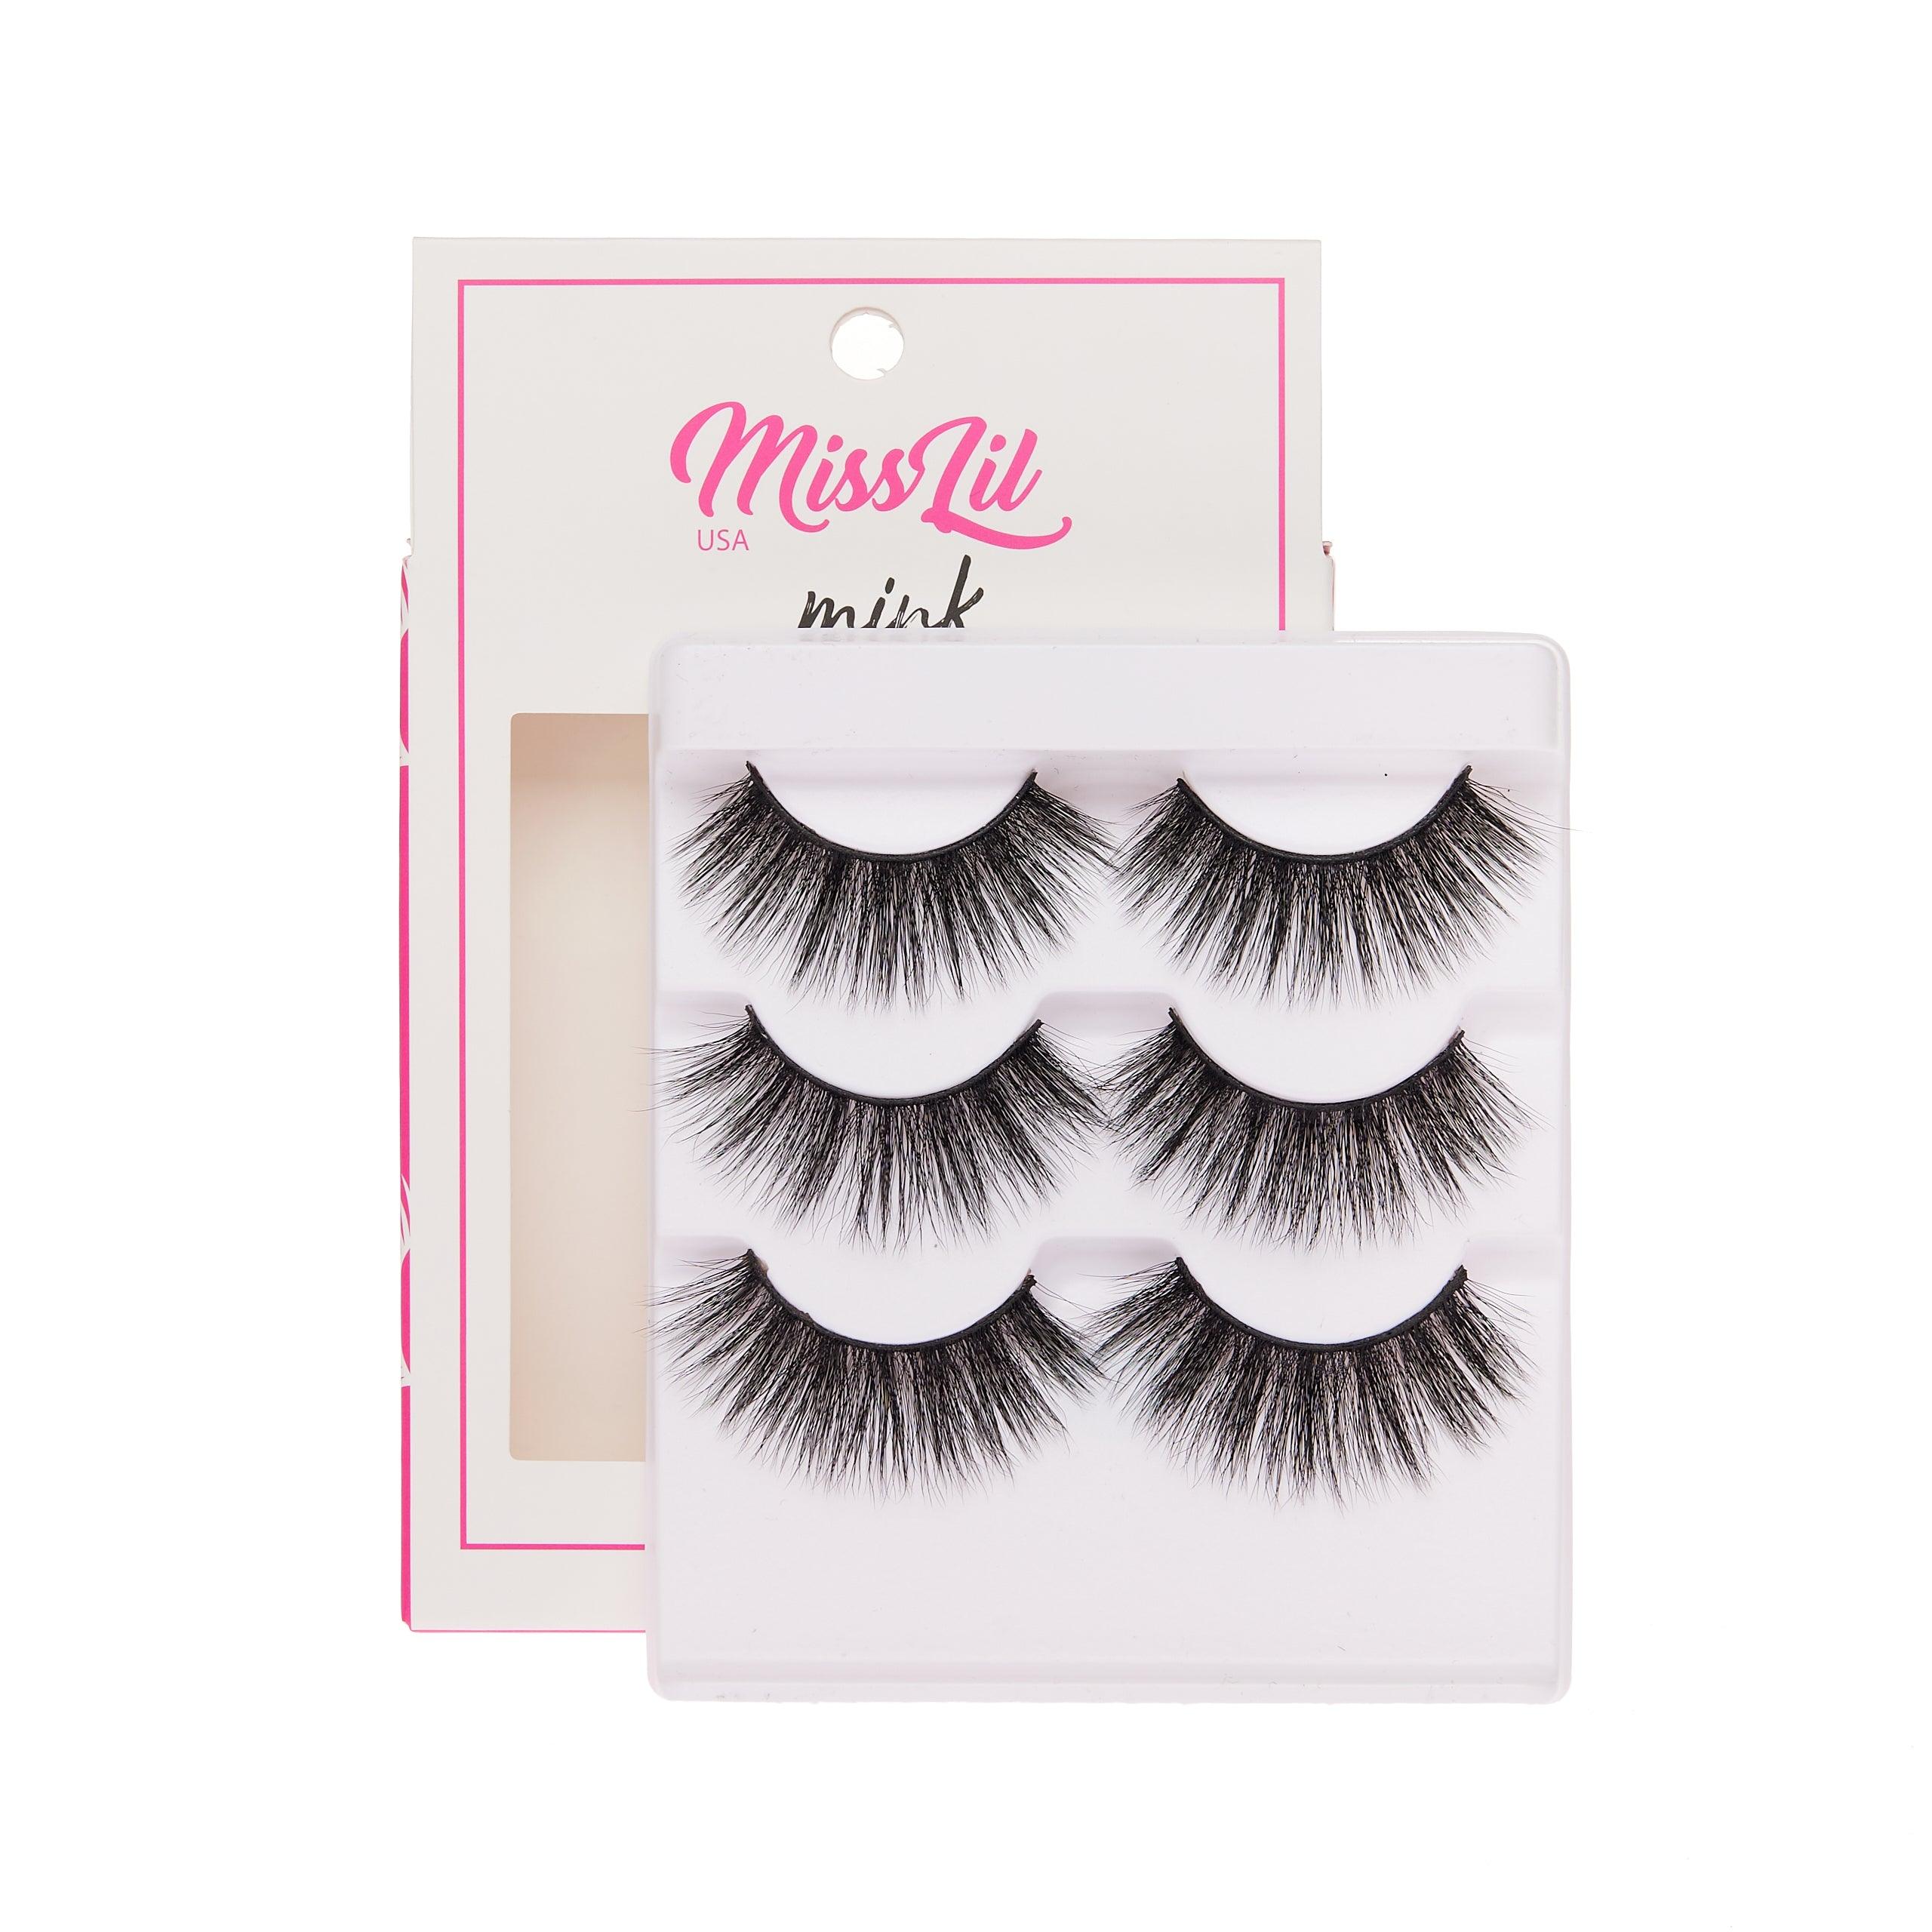 3-Pair Faux Mink Effect Eyelashes - Lash Party Collection #1 ( Pack of 12) - Miss Lil USA Wholesale